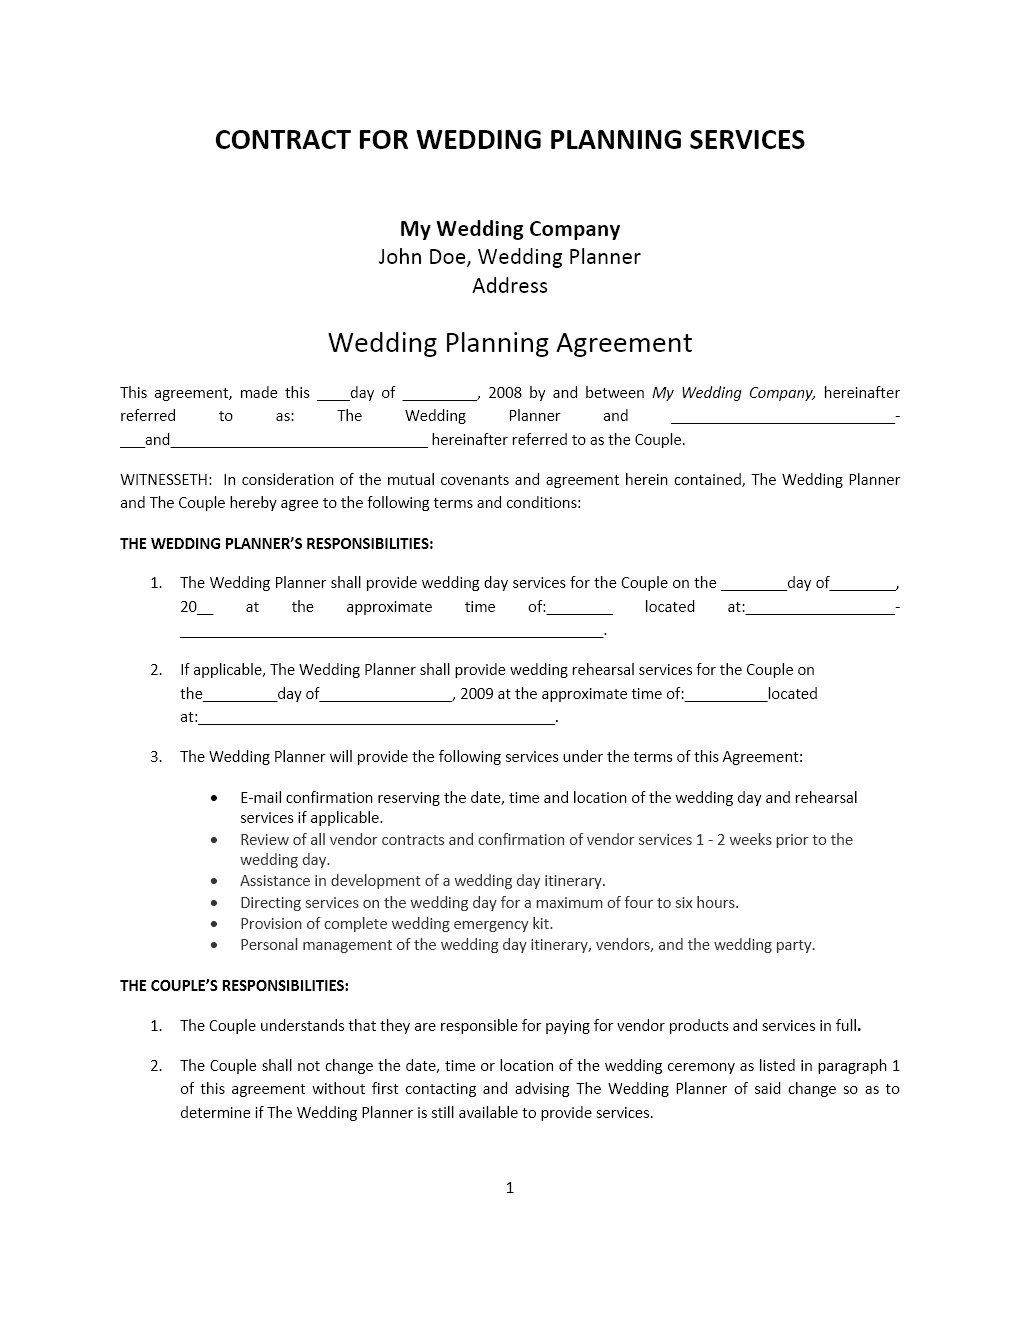 wedding planner contract template respond